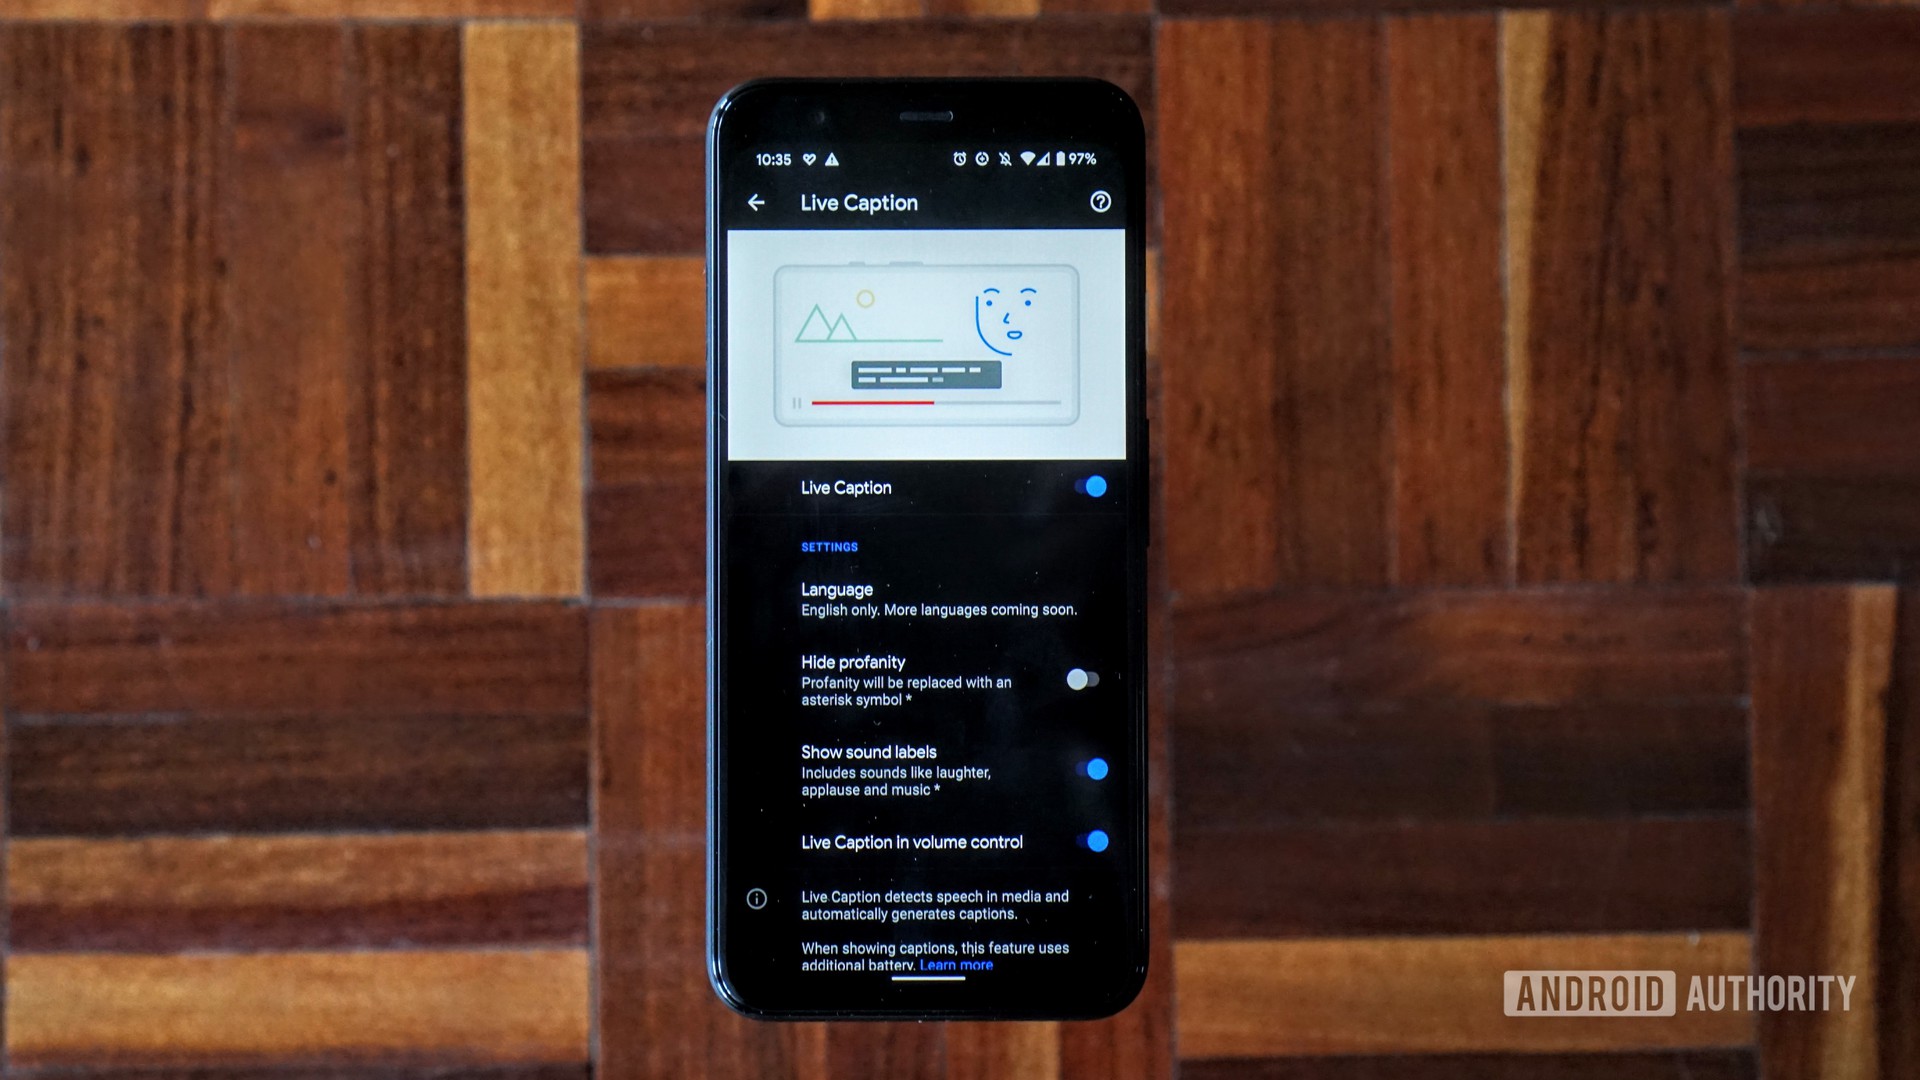 Android 10 Live Caption functionality on the Google Pixel 4.